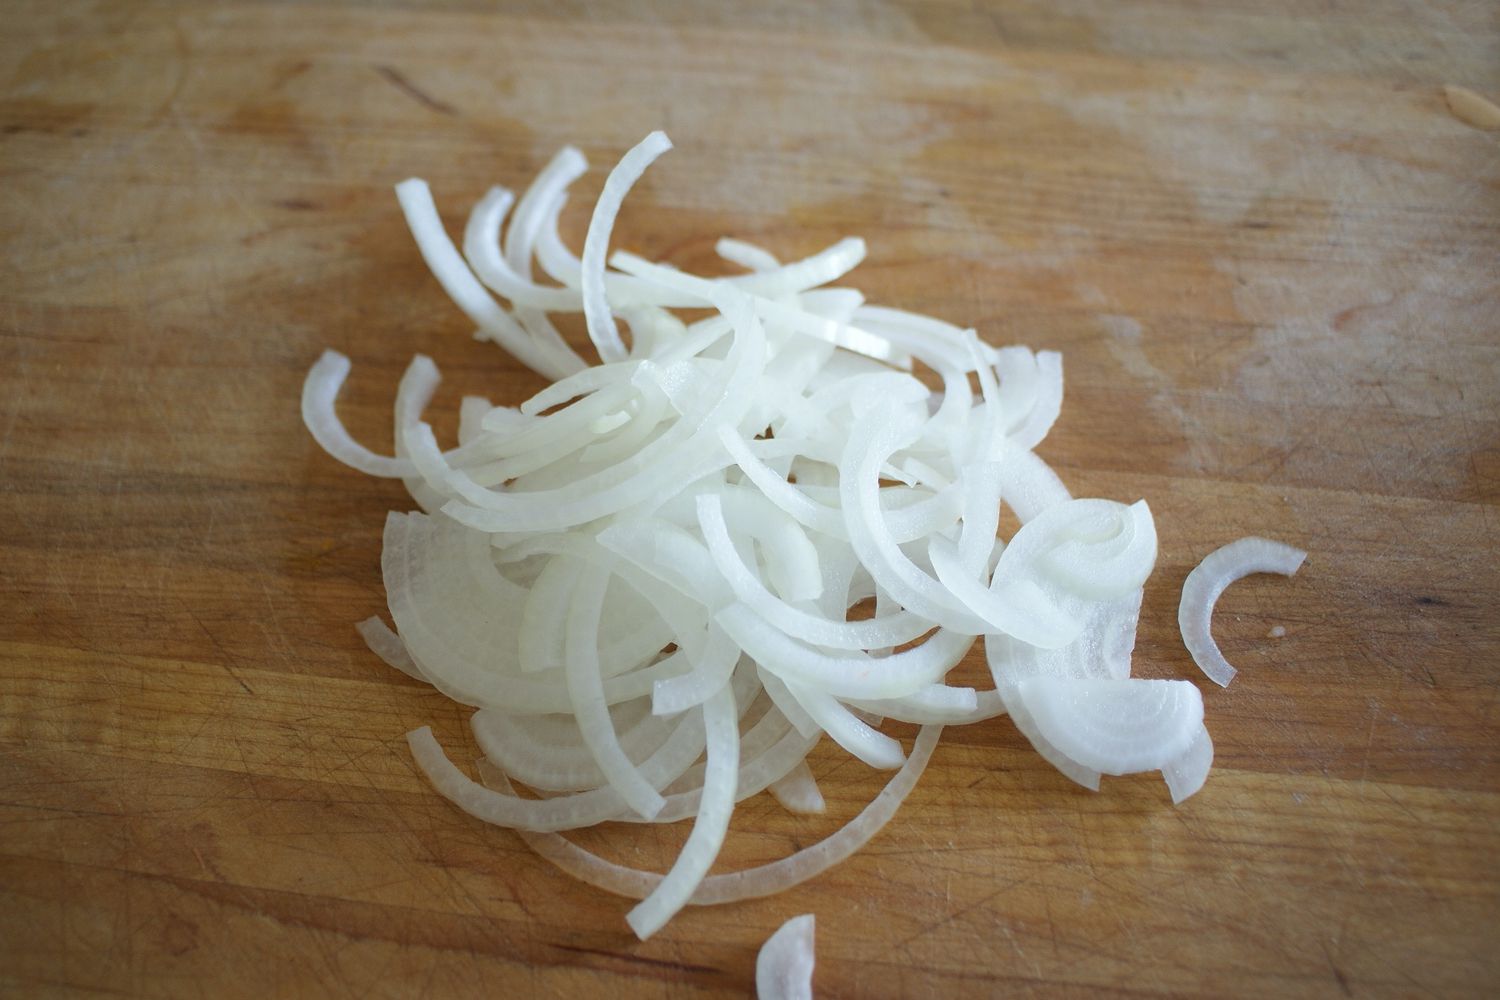 https://recipes.net/wp-content/uploads/2023/10/how-to-cut-onions-thin-1696773400.jpg